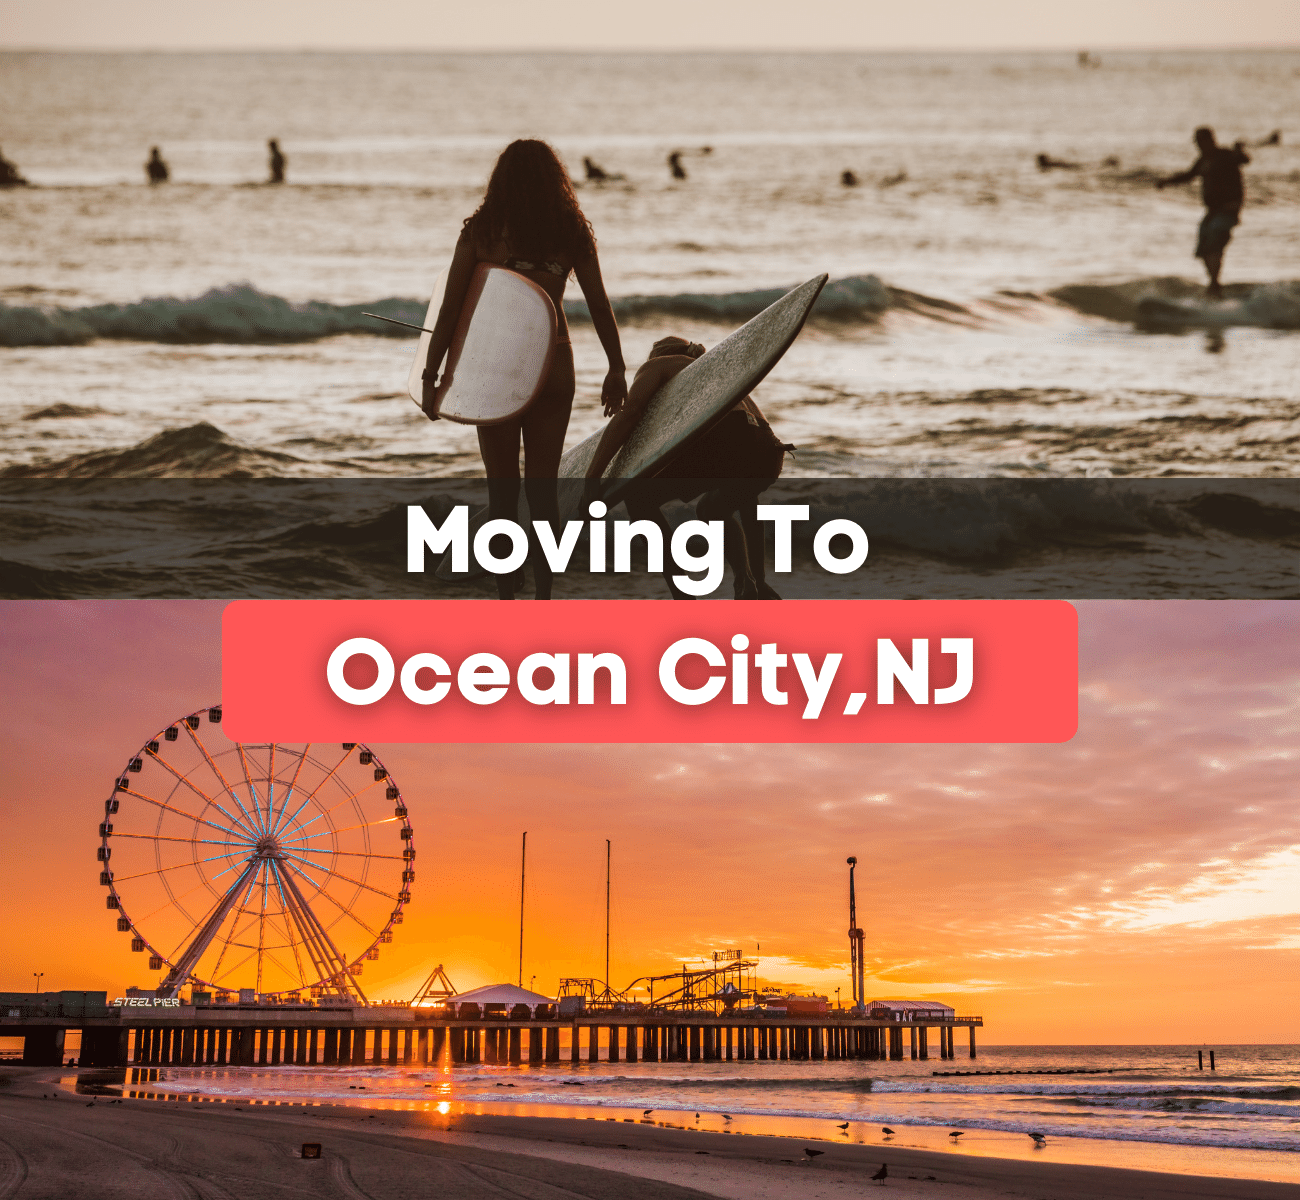 Moving to Ocean City, NJ - surfing, ocean, and pier